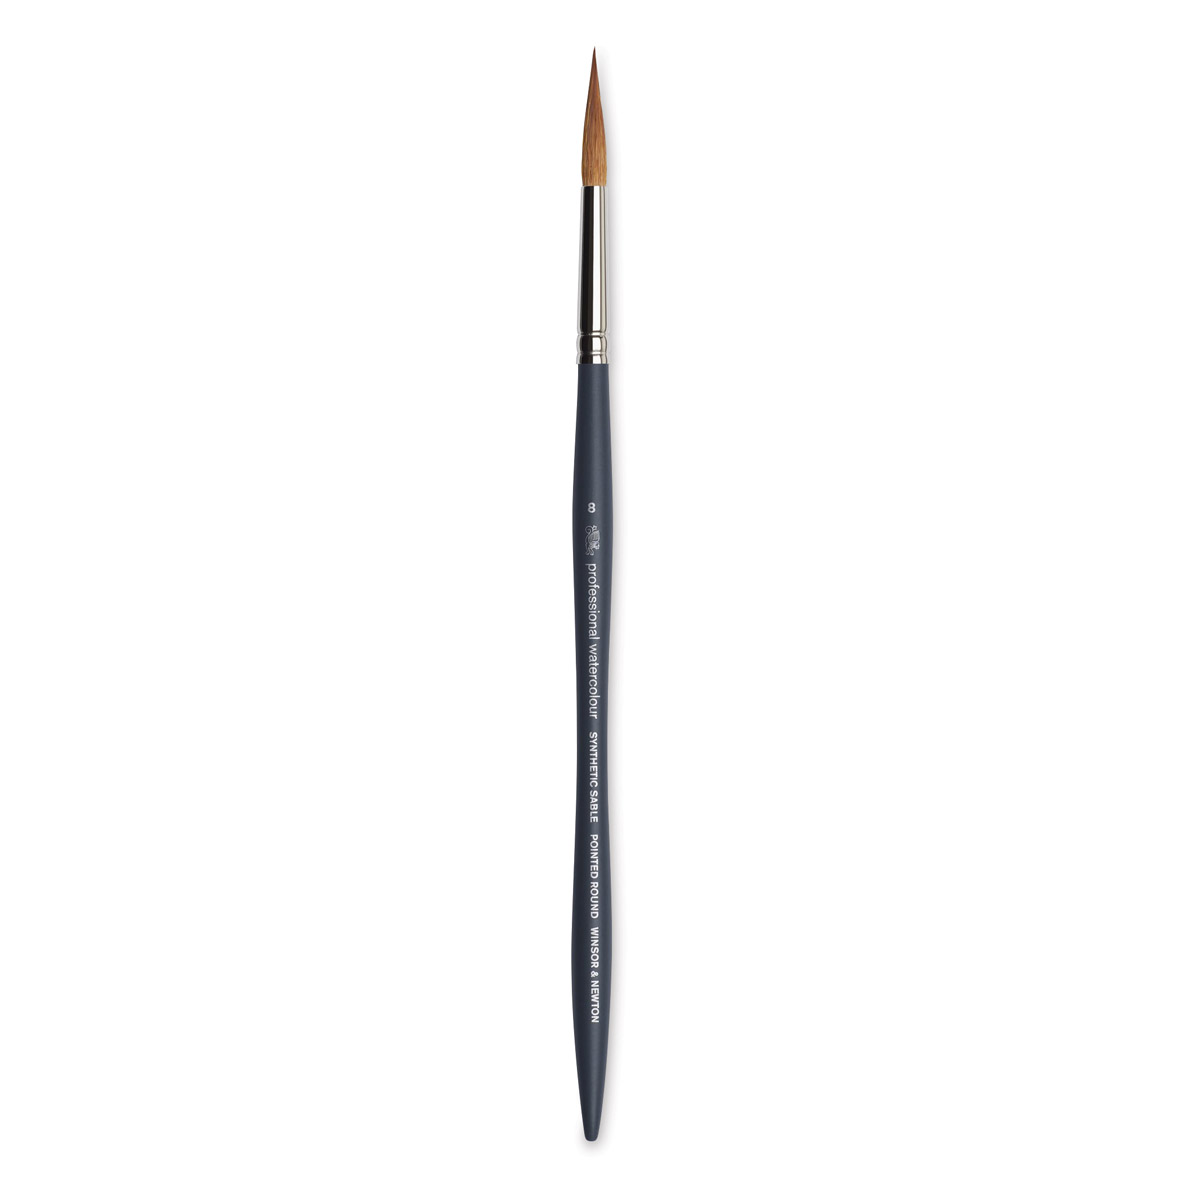 Winsor & Newton Professional Watercolor Synthetic Sable Brush, Mop, 1 